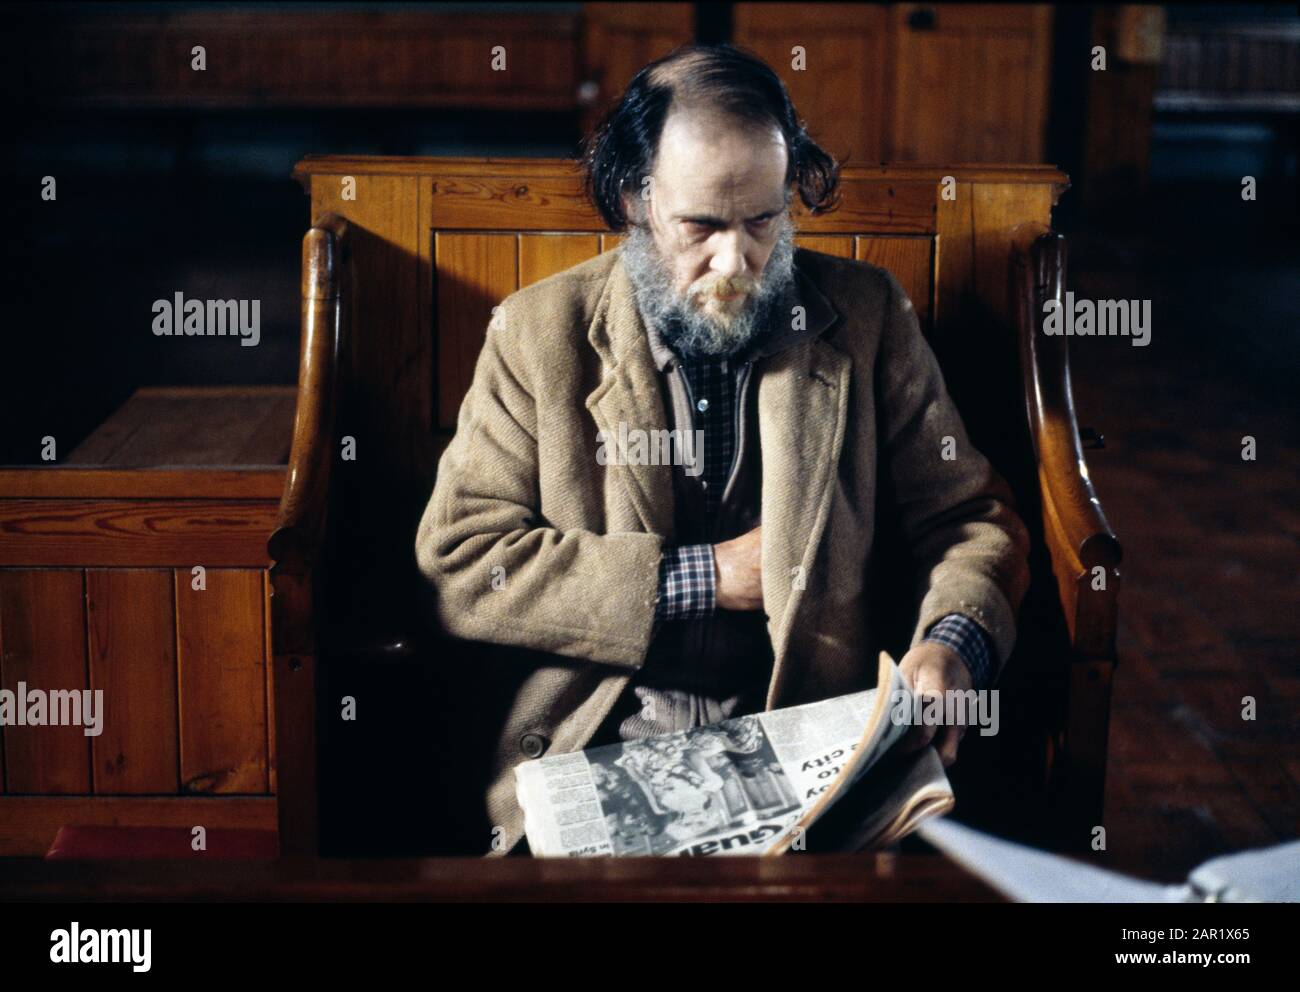 Dave Wade as 'The Tramp' Film Still from 'One Across' (Dir Ian Fliman, 1992) Stock Photo